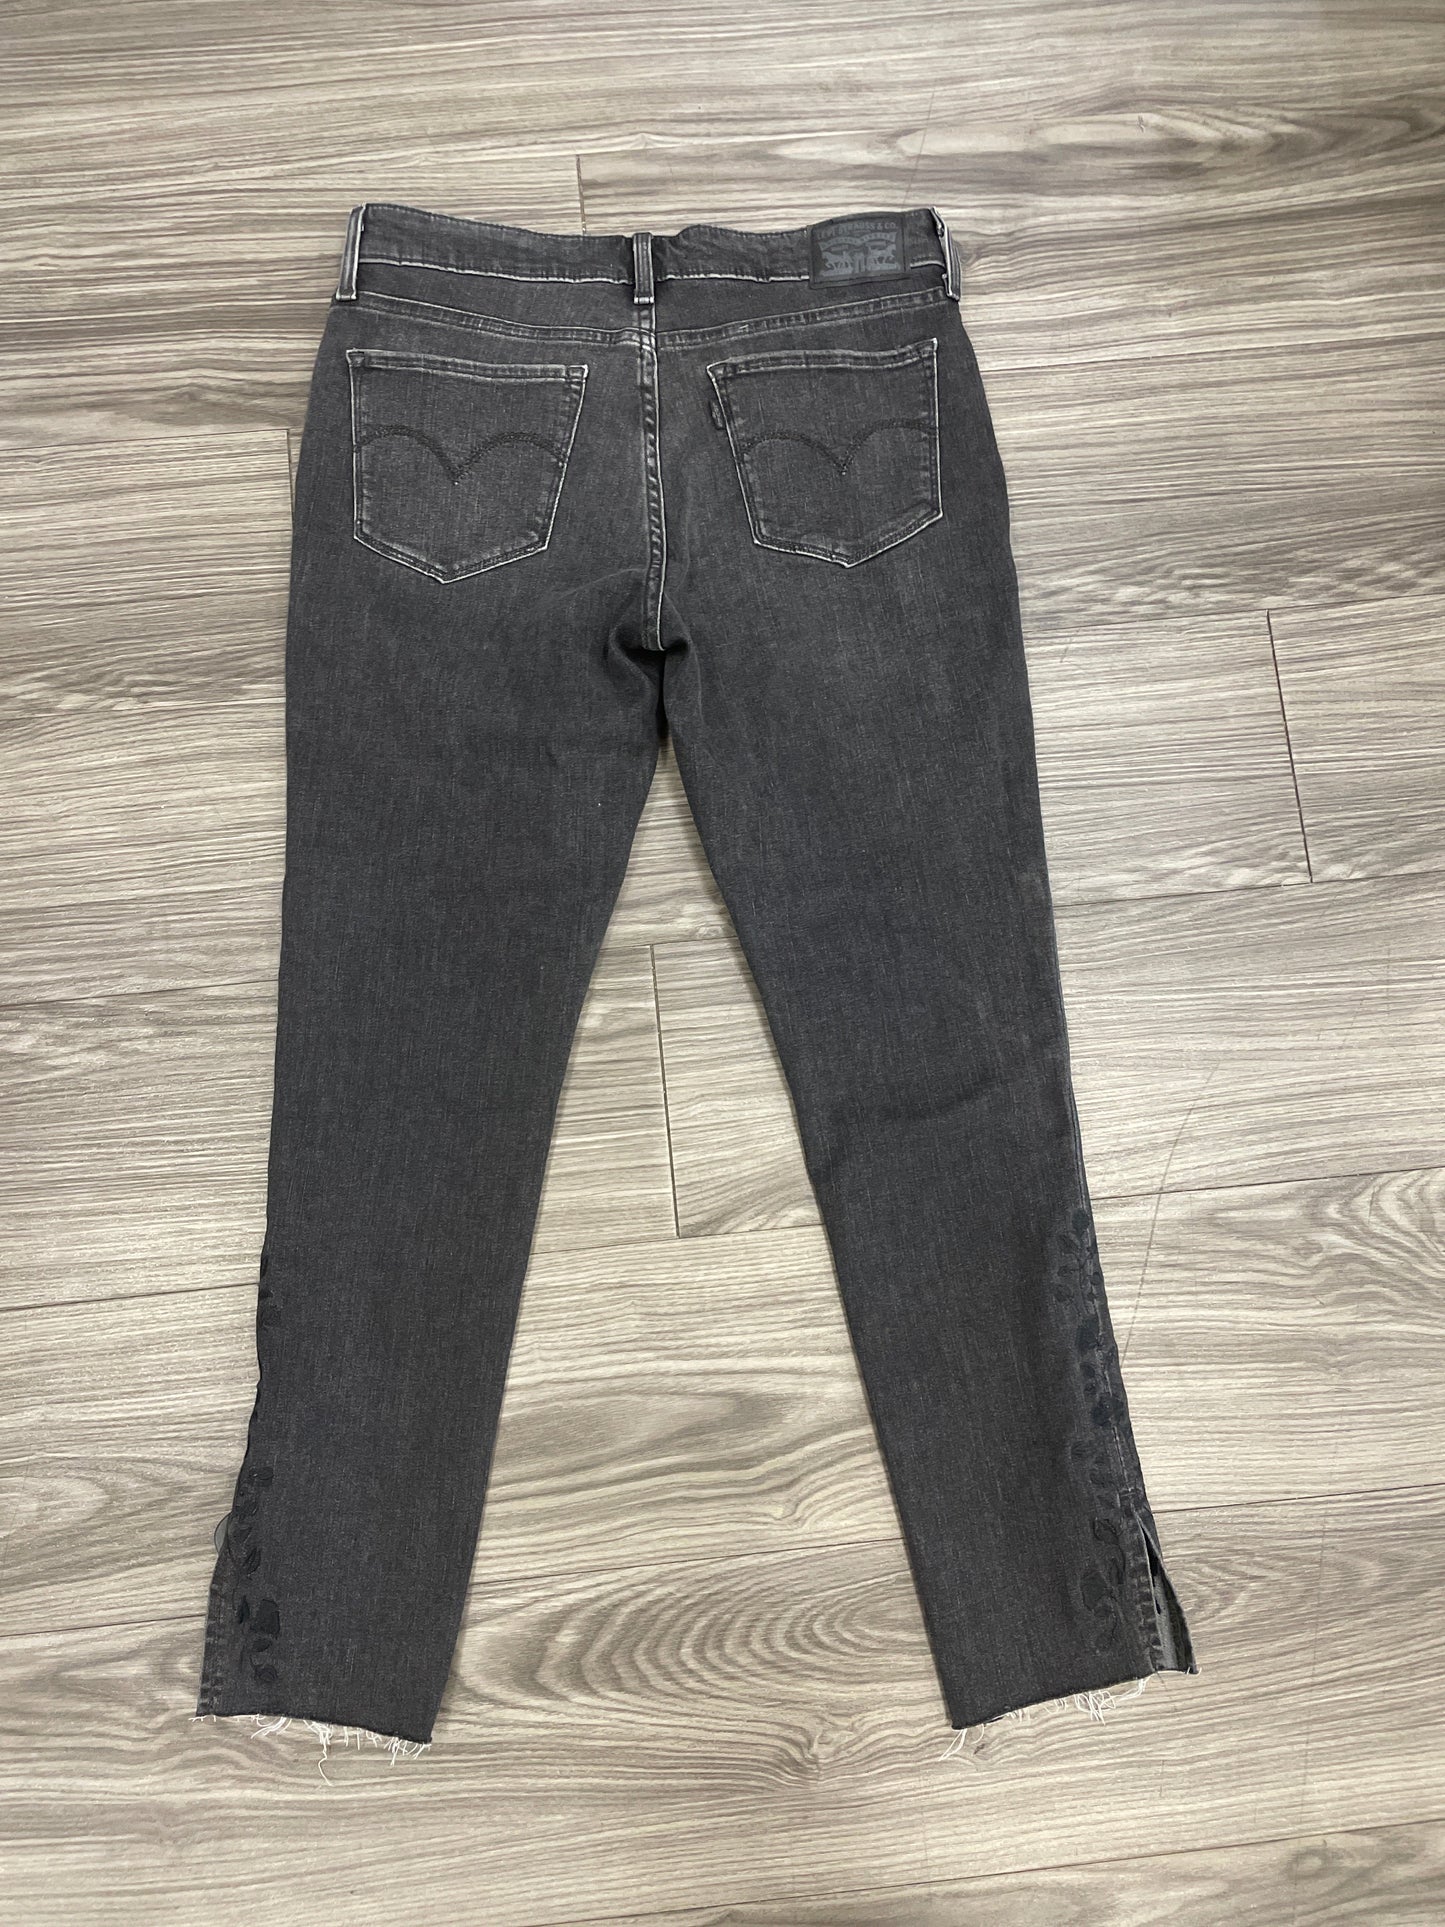 Jeans Skinny By Levis  Size: 8